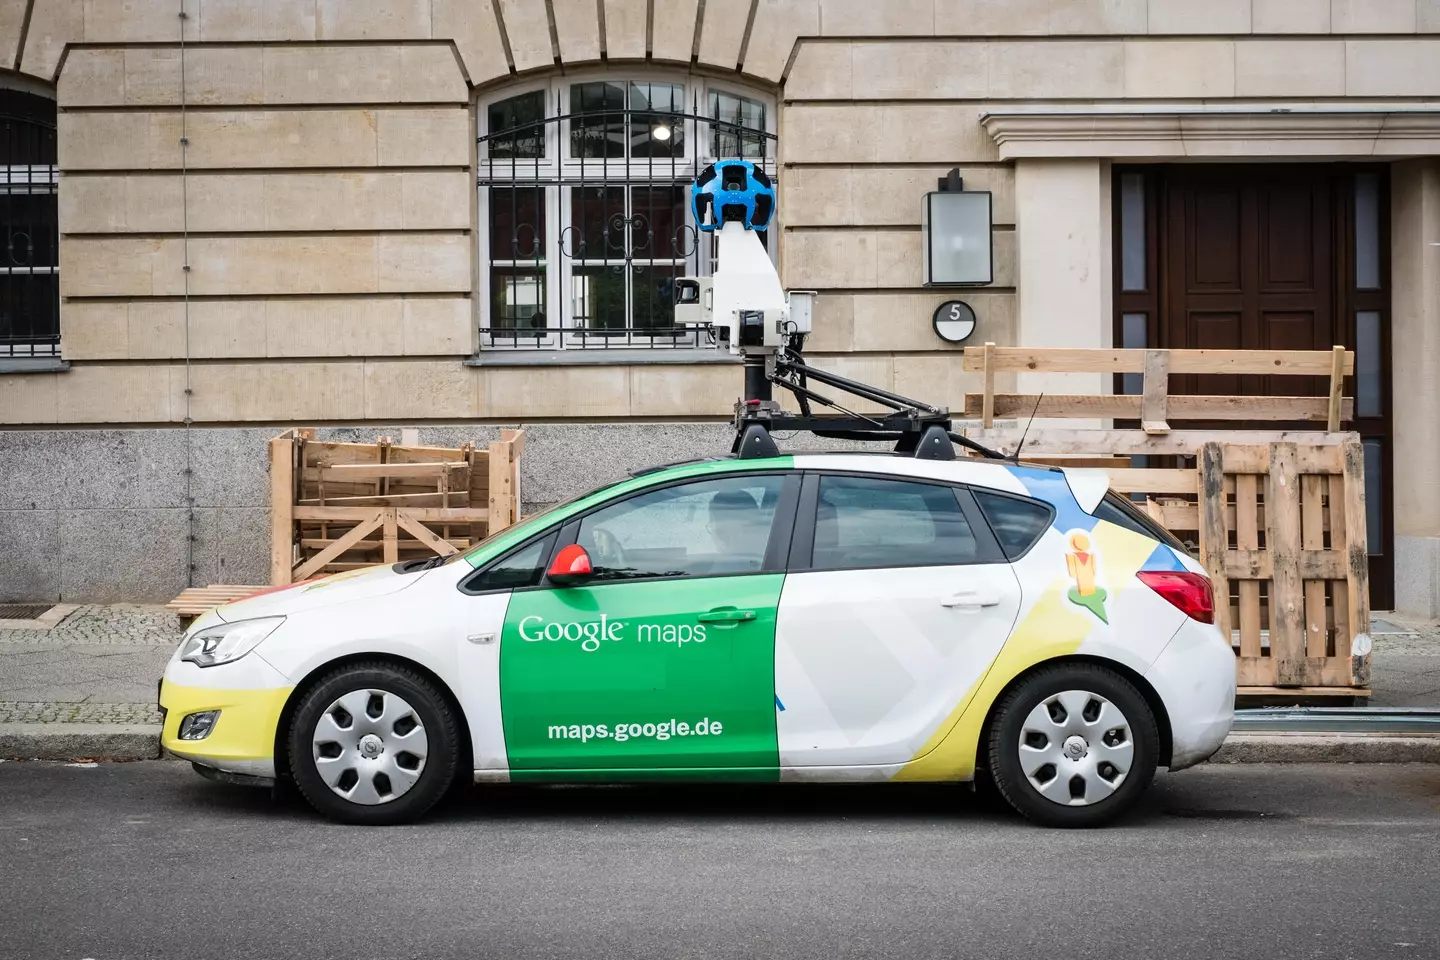 The Google Maps car gets just about everywhere these days.